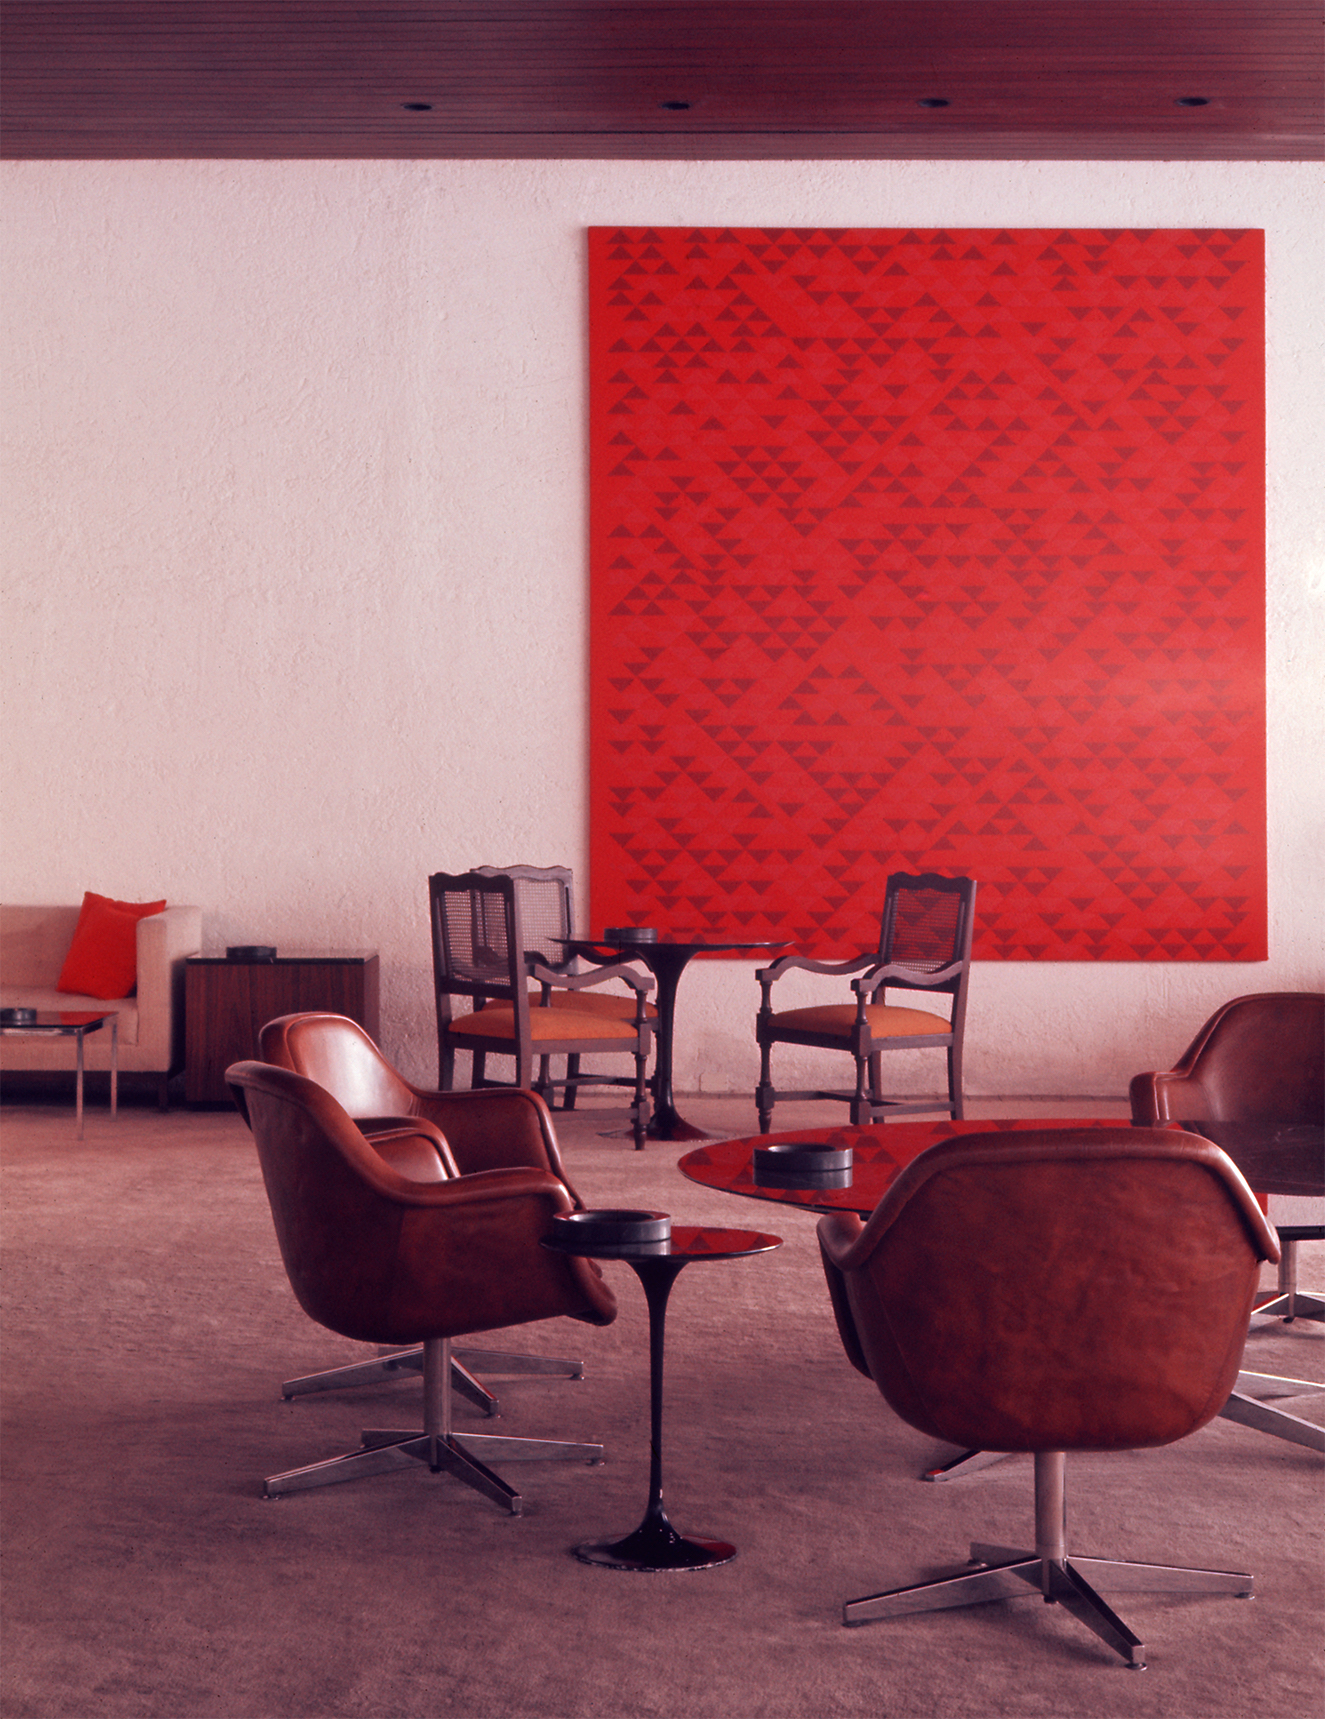 Anni Albers, Camino Real, Hotel Camino Real, Mexico City, Mexico, 1968. Photograph by Jon Naar. Courtesy of The Josef and Anni Albers Foundation, 1976.12.1. Copyright Jon Naar Photography.